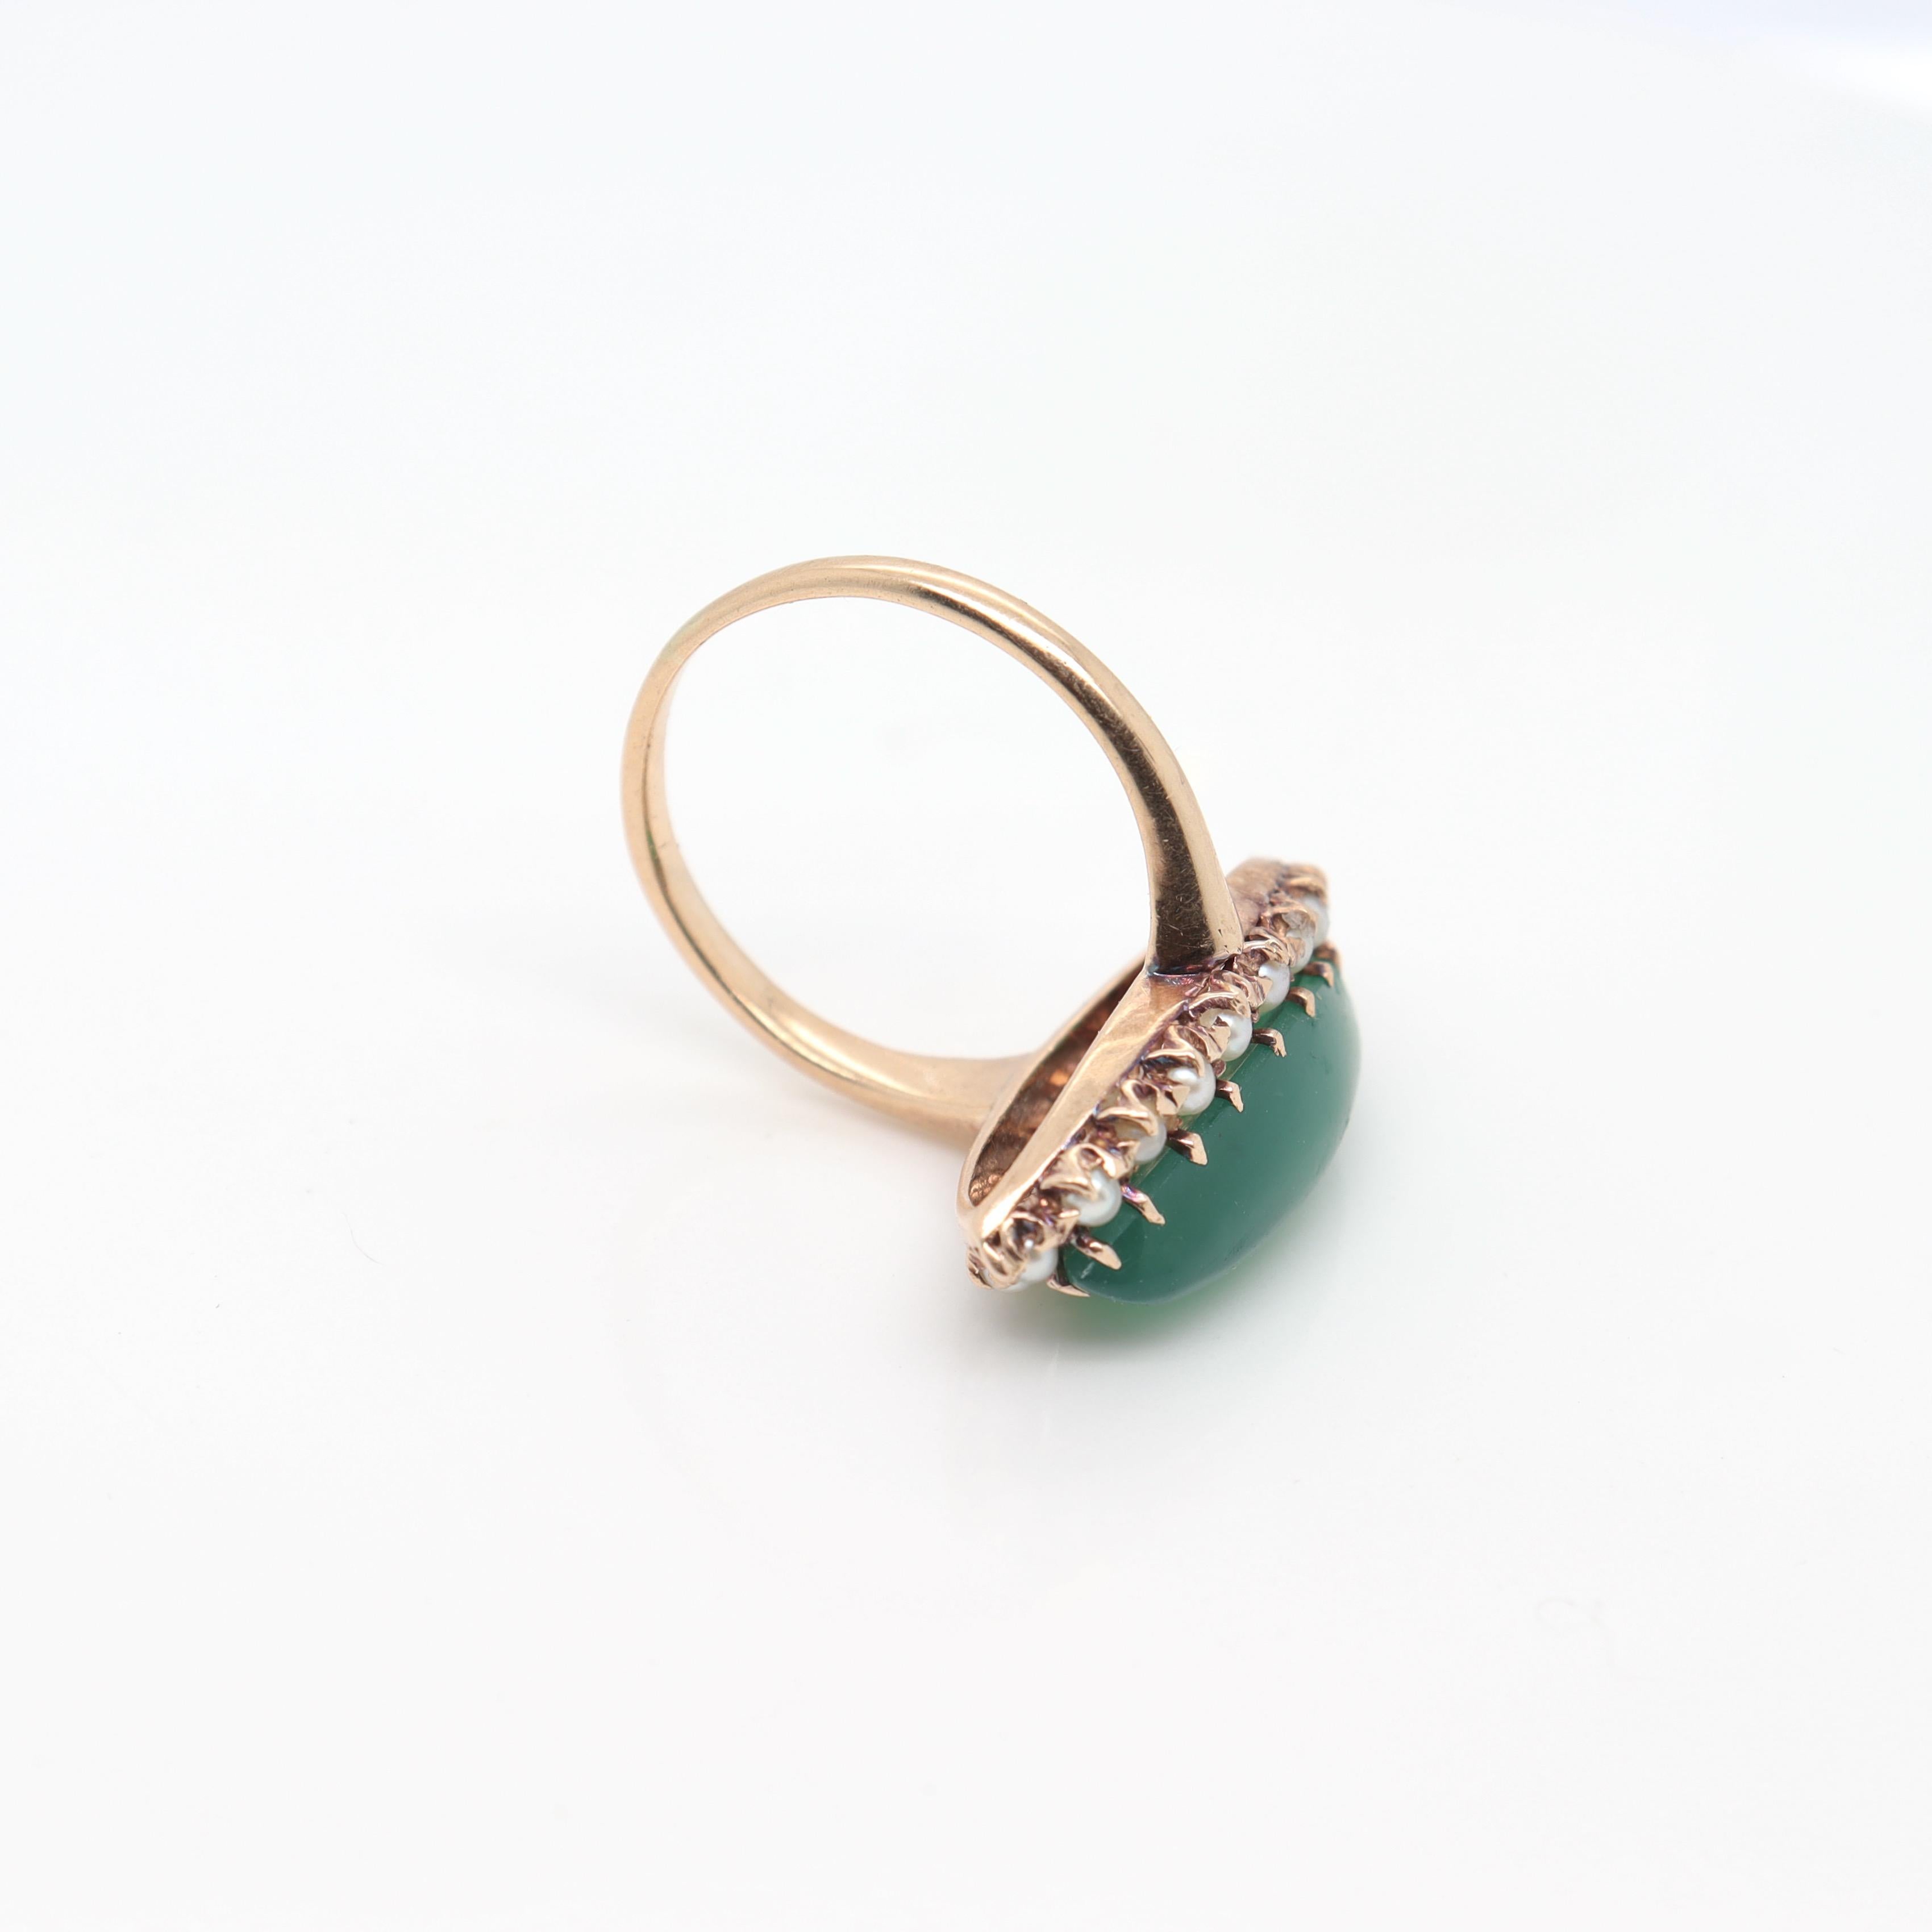 Antique 14K Gold Edwardian Style Navette Chrysoprase Cabochon & Seed Pearl Ring For Sale 4